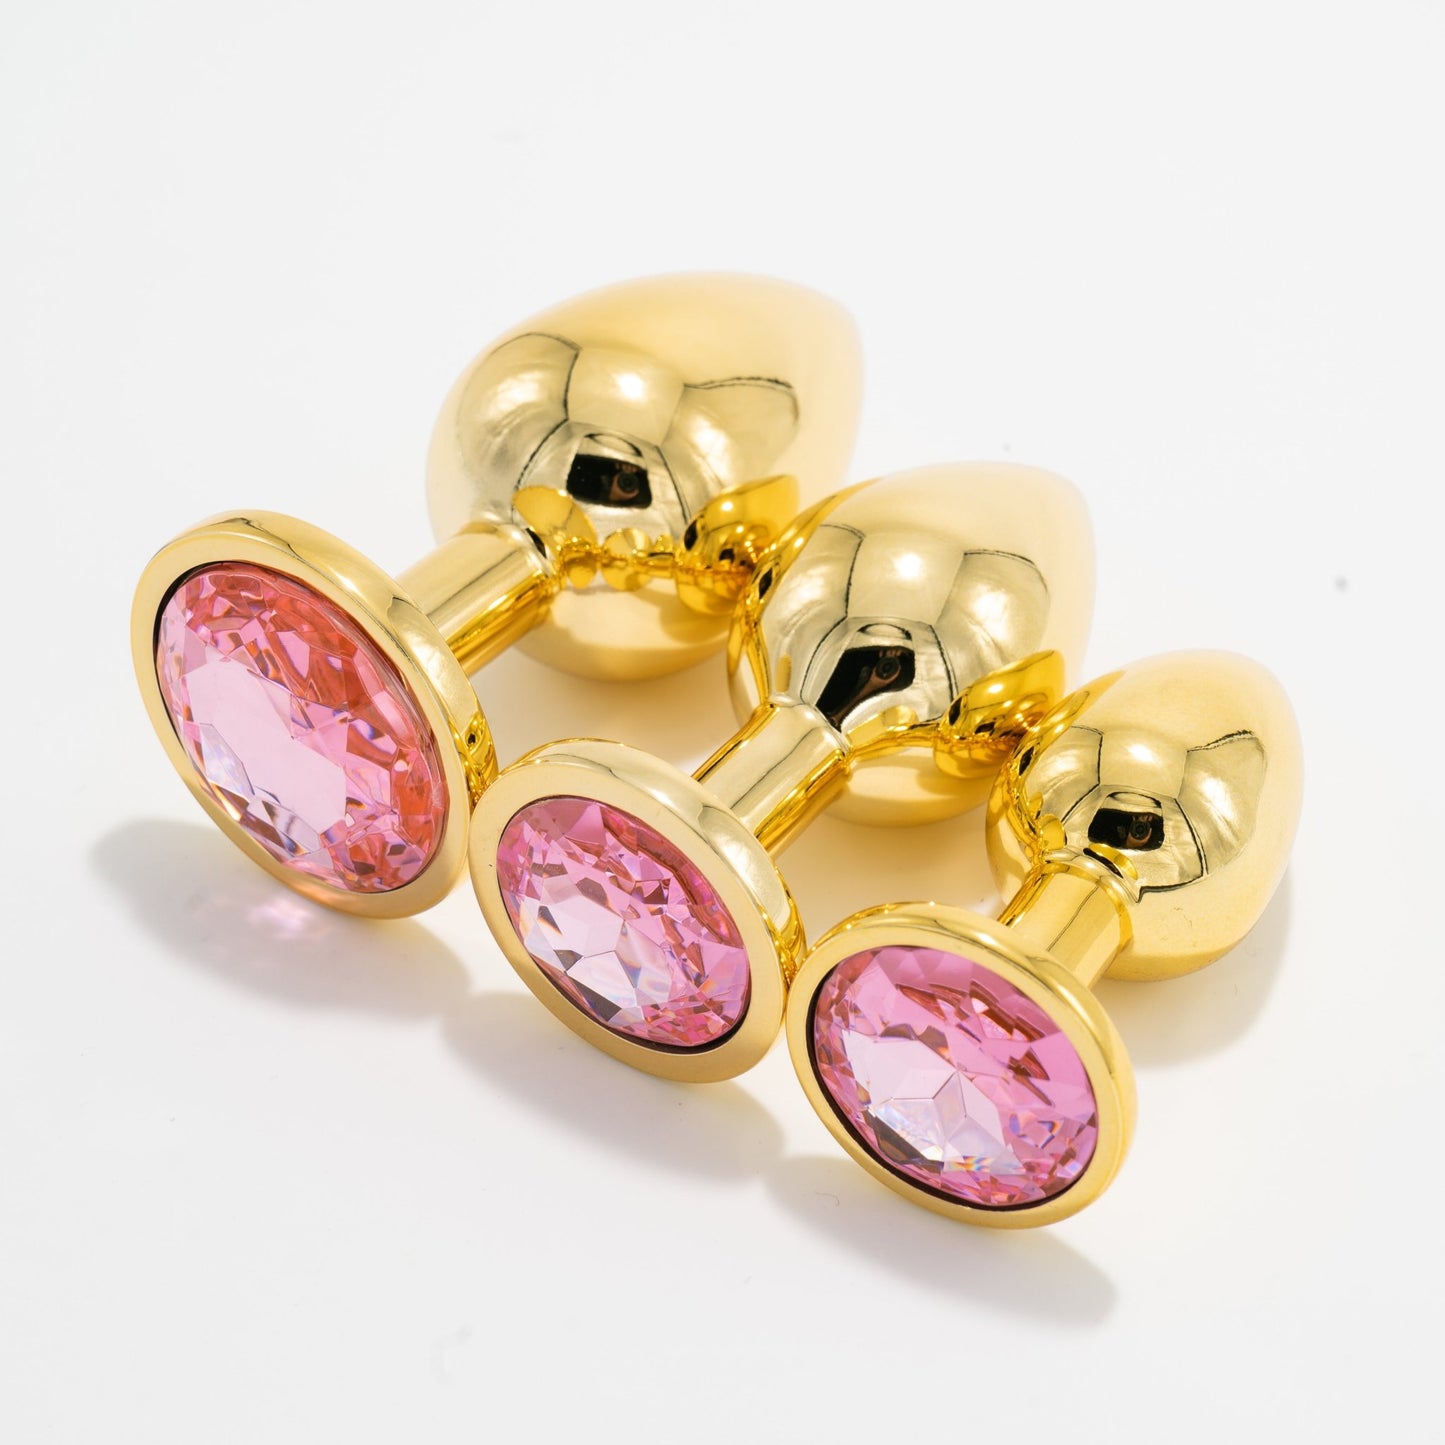 Metaal Gouden Buttplug Set - Roze - OHYES.nl